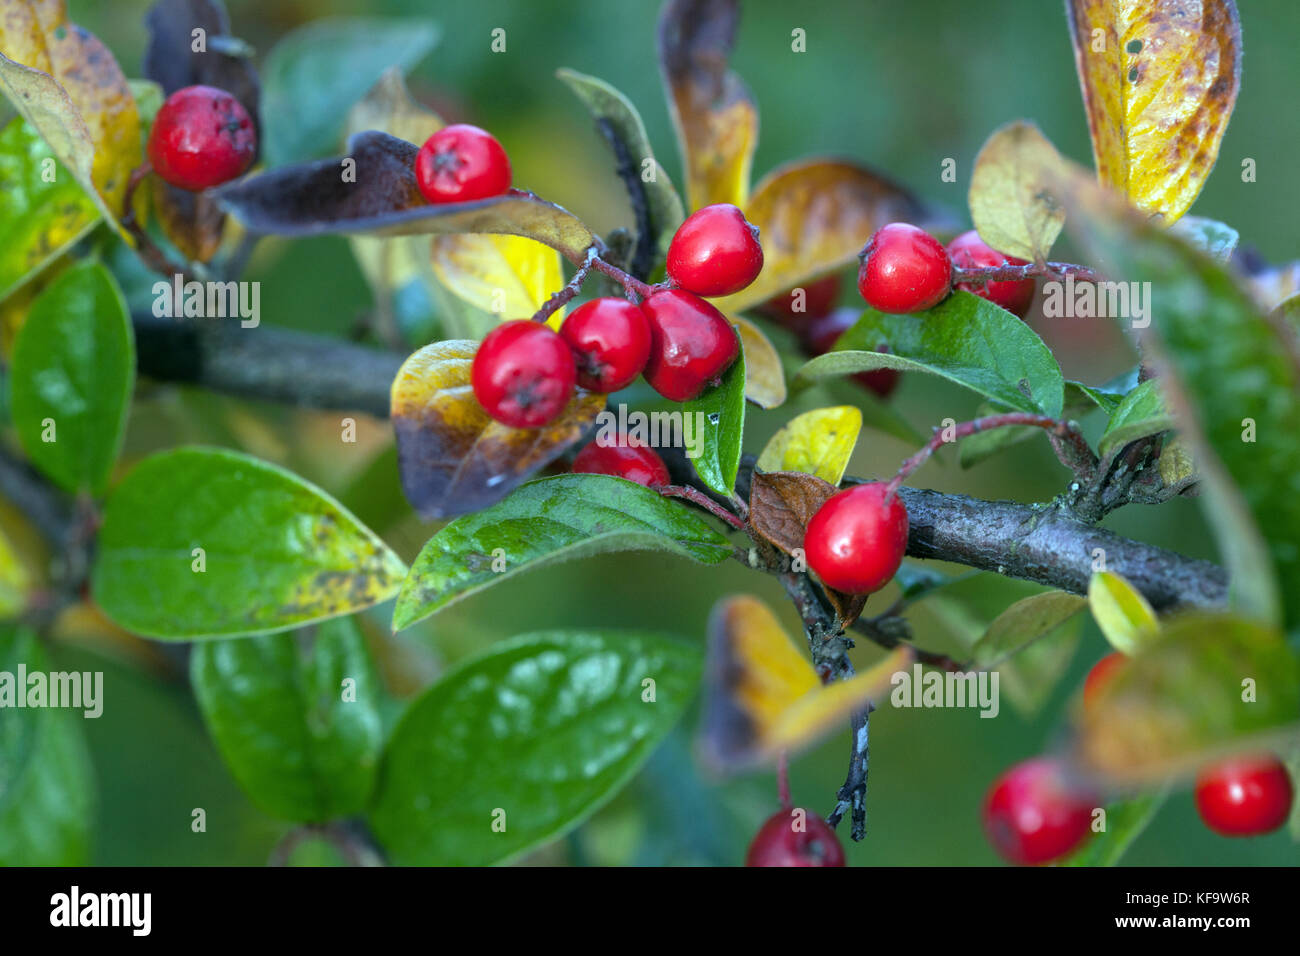 Cotoneaster neoantoninae red berries, fruits on a branch, a shrub in autumn Cotoneaster berries Stock Photo